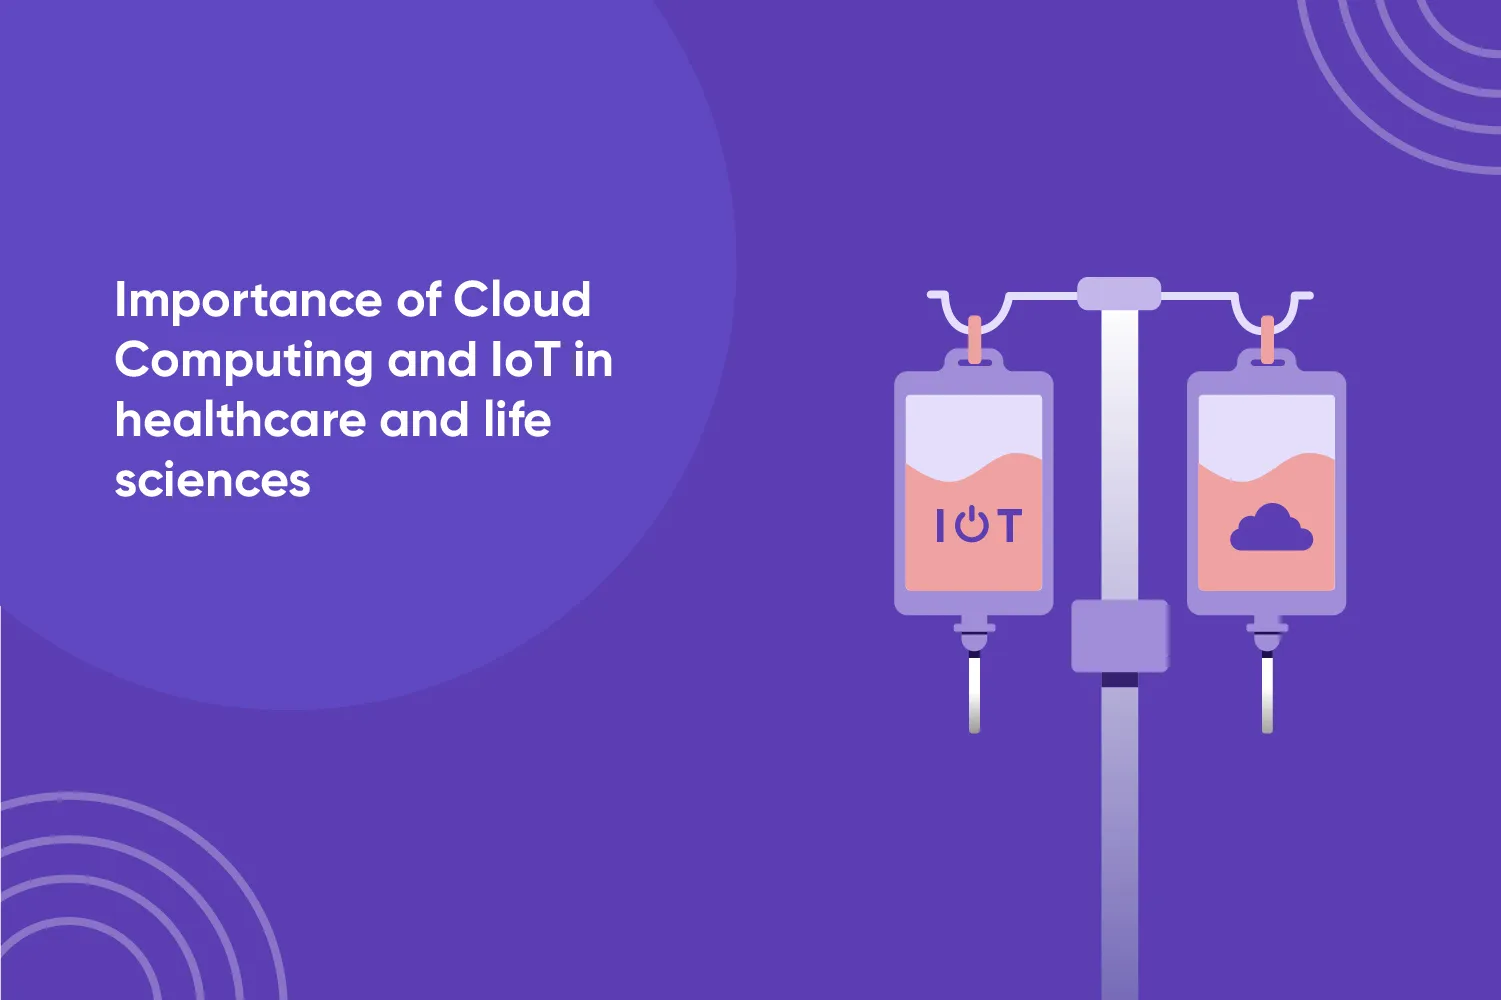 Cloud Computing and IoT in Healthcare and Life Sciences